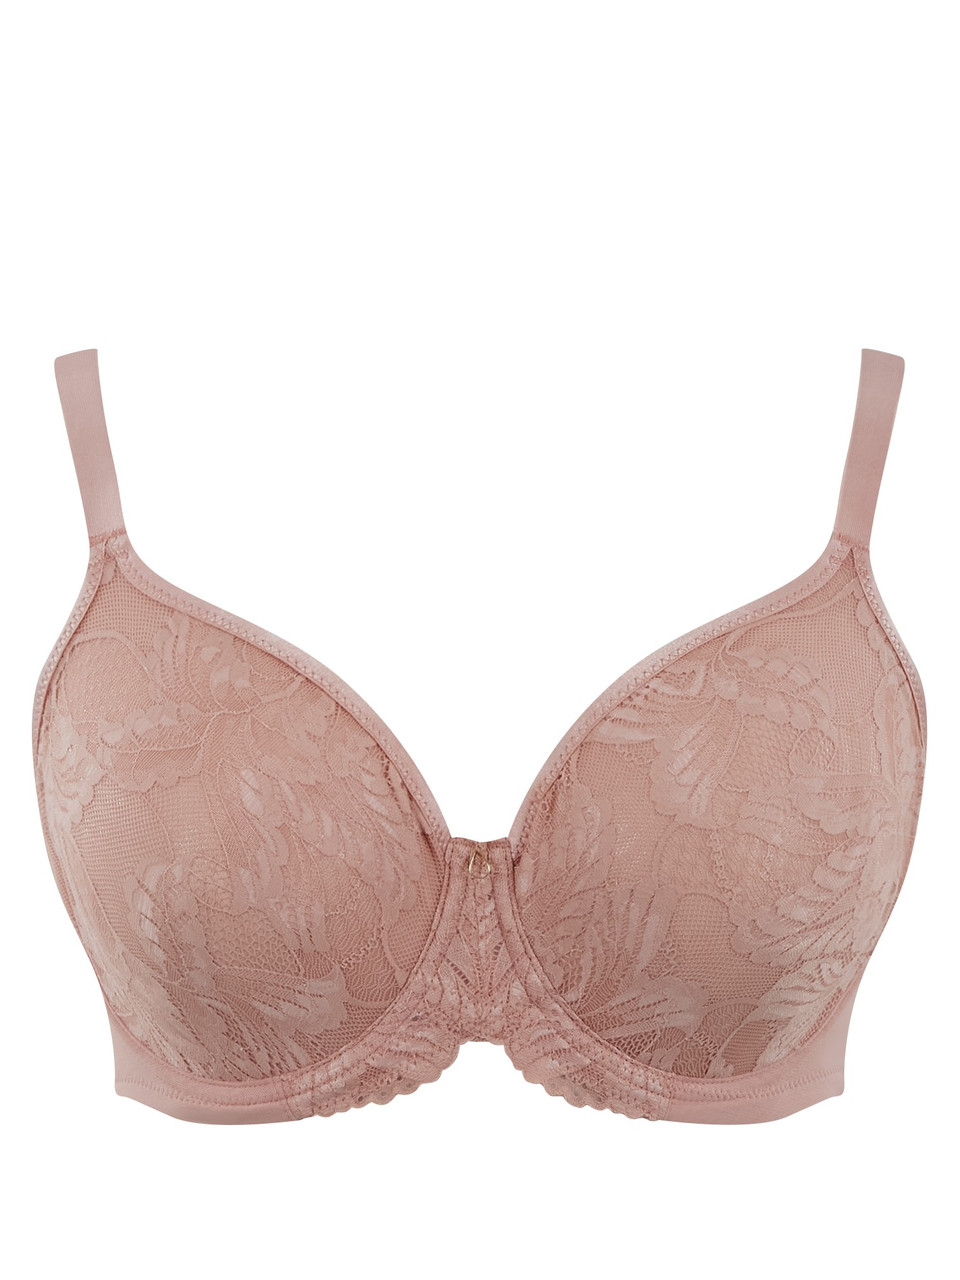 Bra Styles Explained & Bra Industry Terms Defined